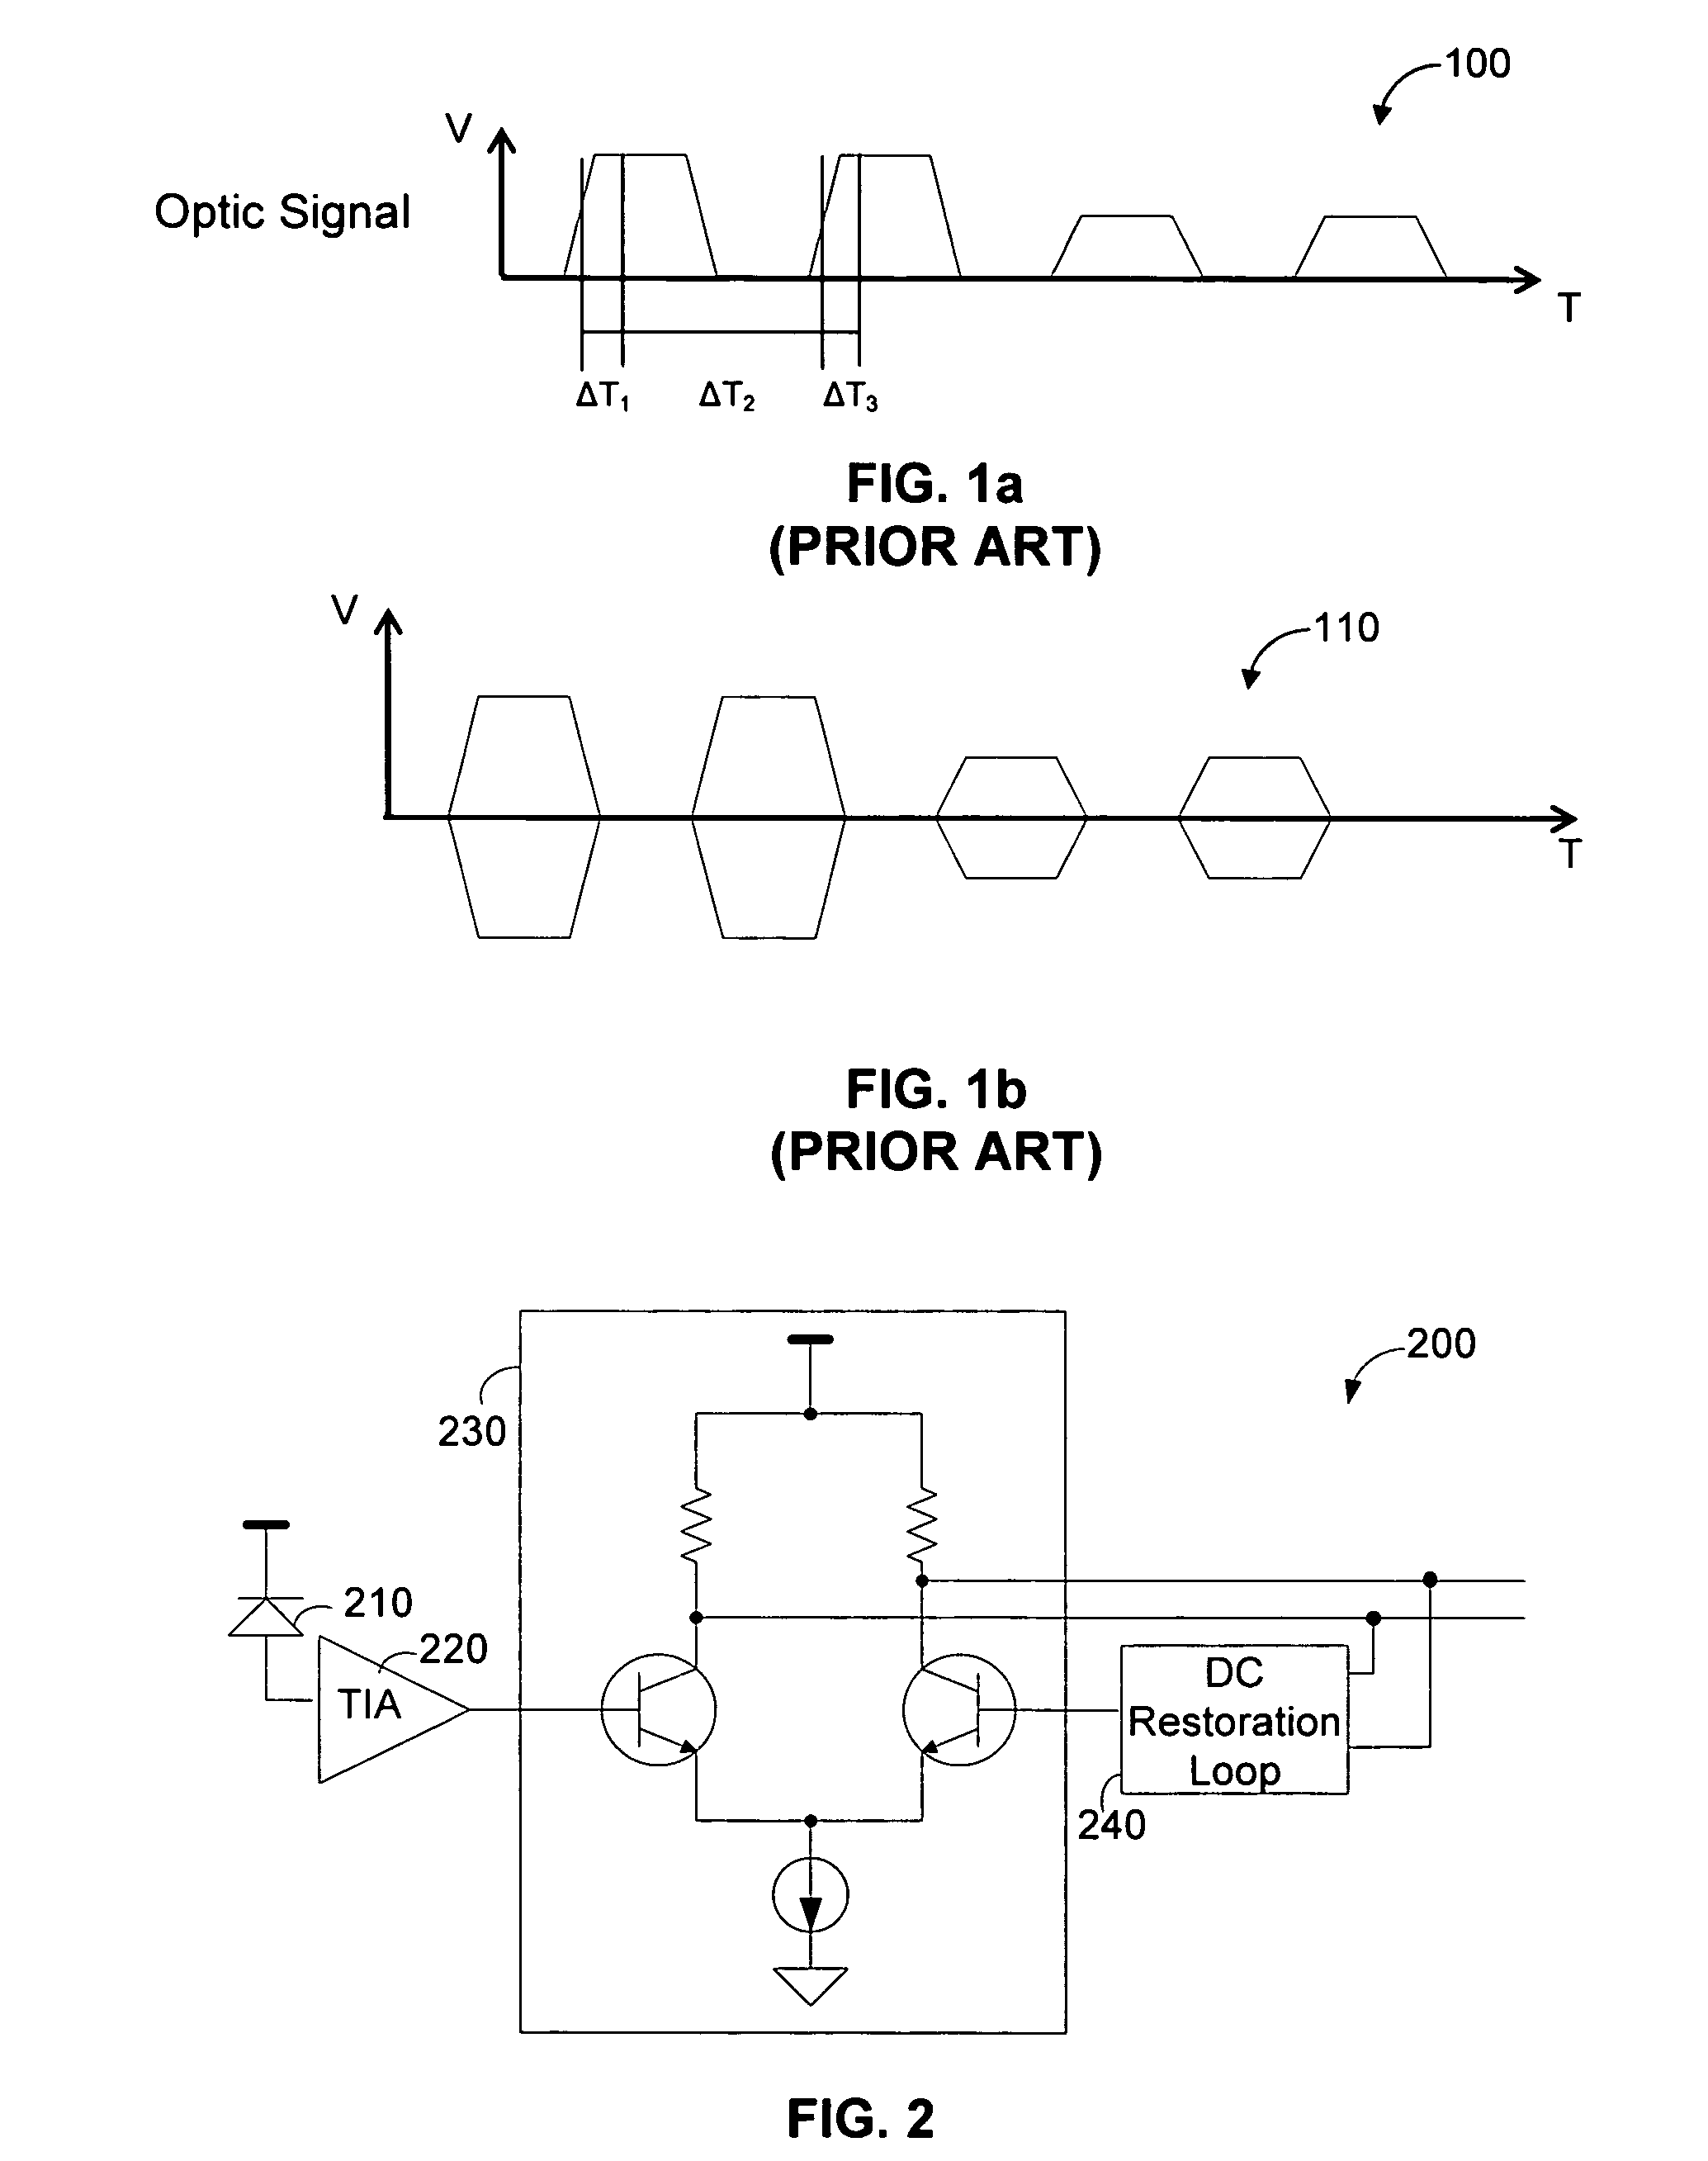 Transimpedance (TIA) circuit usable for burst mode communications